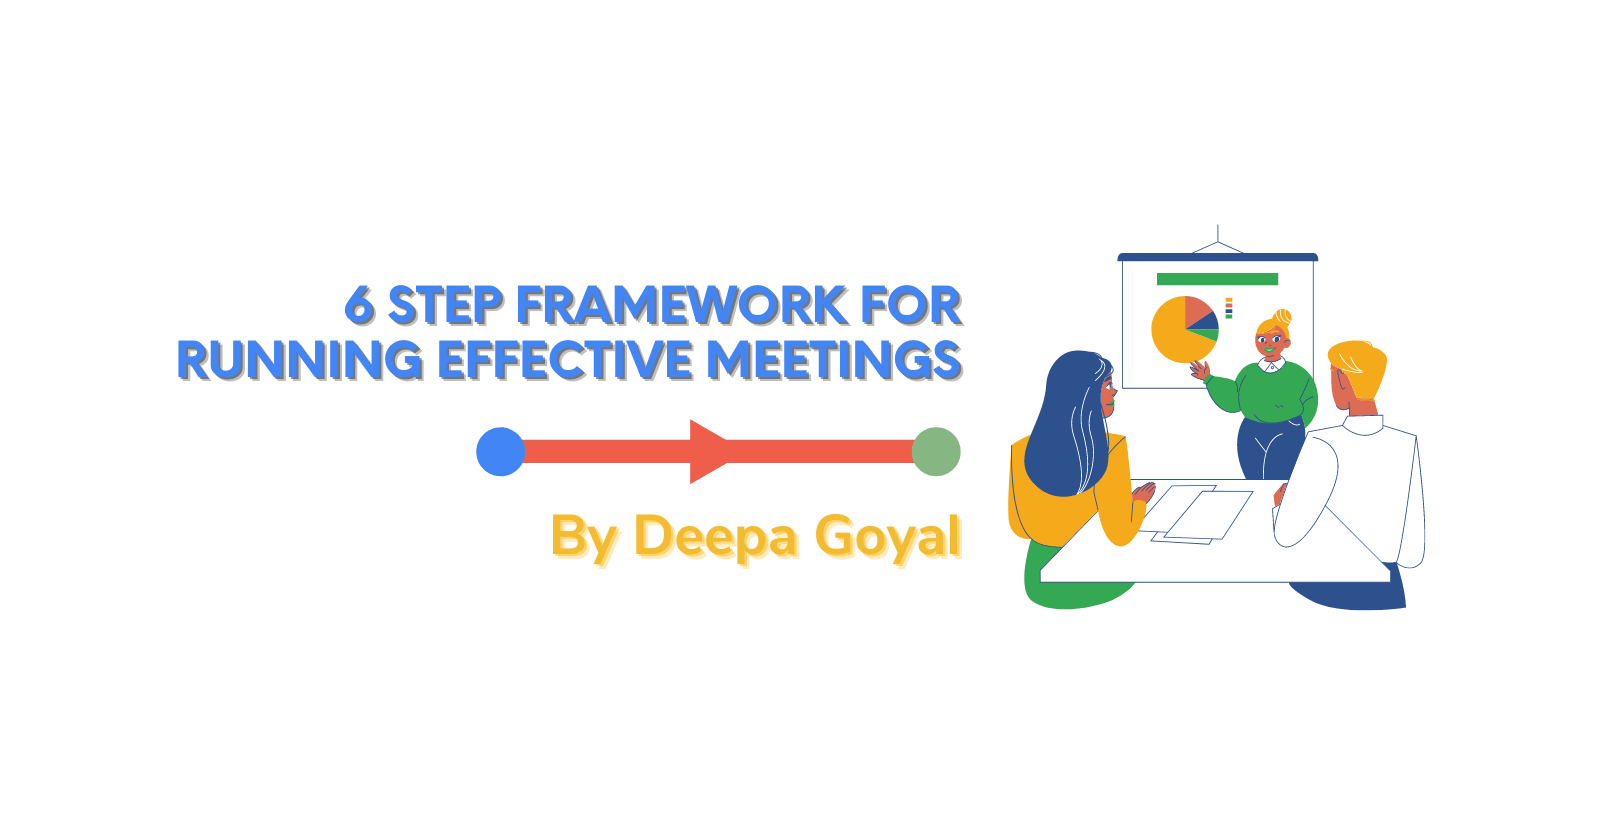 A simple 6 step framework for running effective meetings